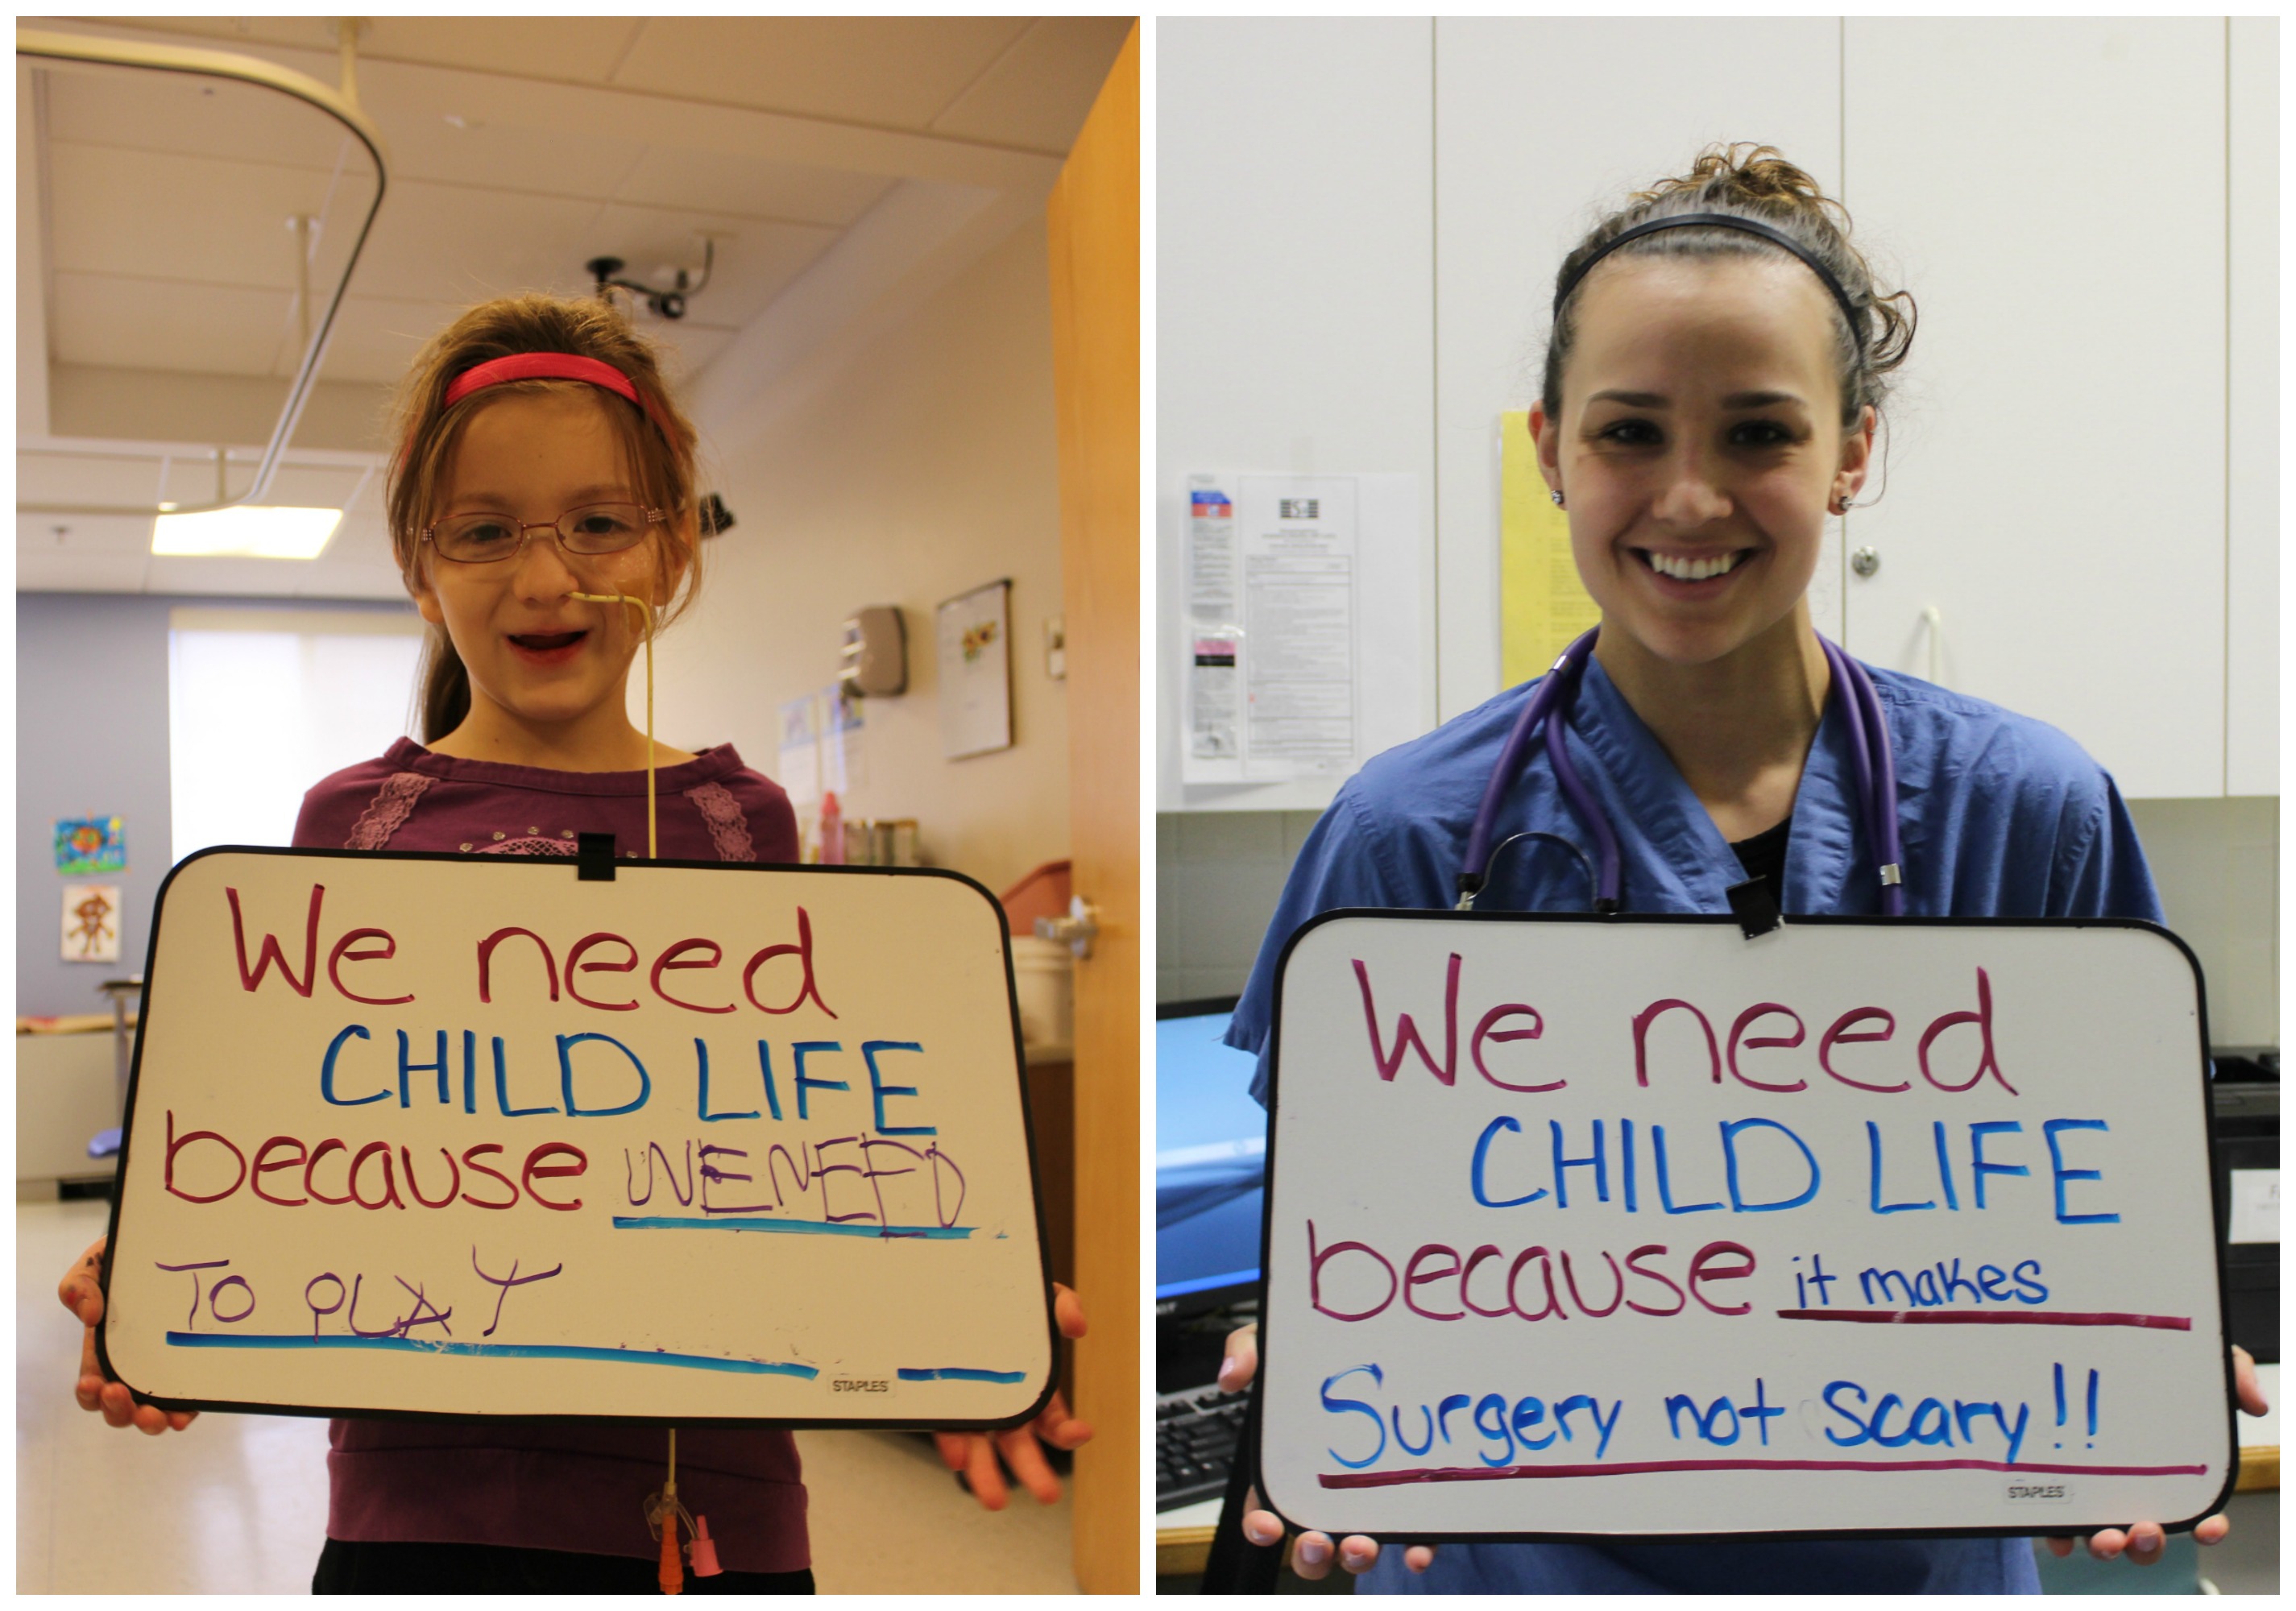 "We need Child Life because we need to play." and "We need Child Life because it makes surgery not scary!"